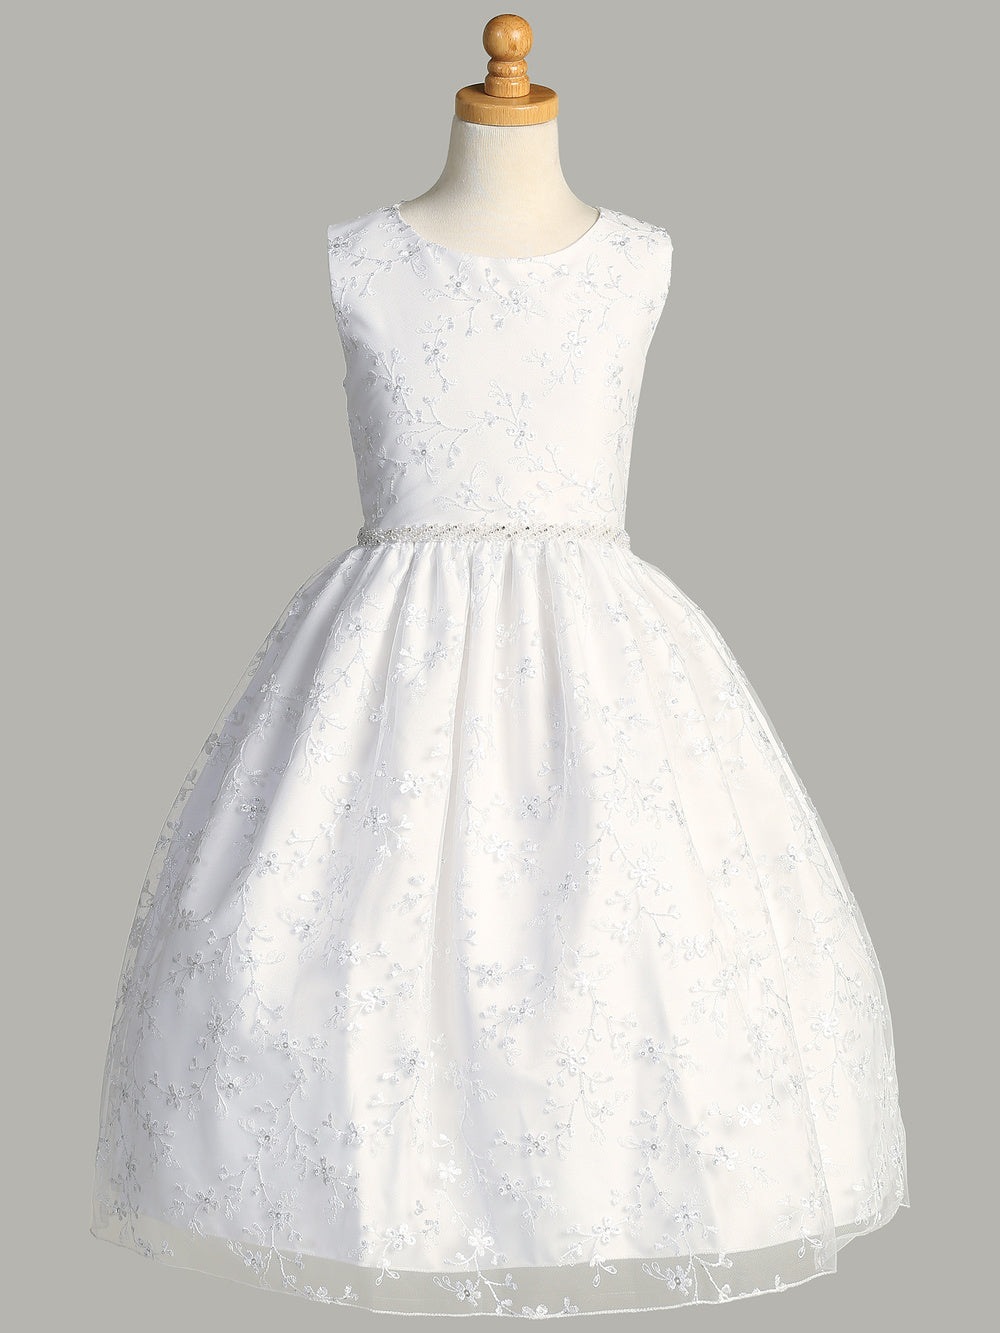 A full-length view of the First Communion Dress showing the tea-length and elegant silhouette.